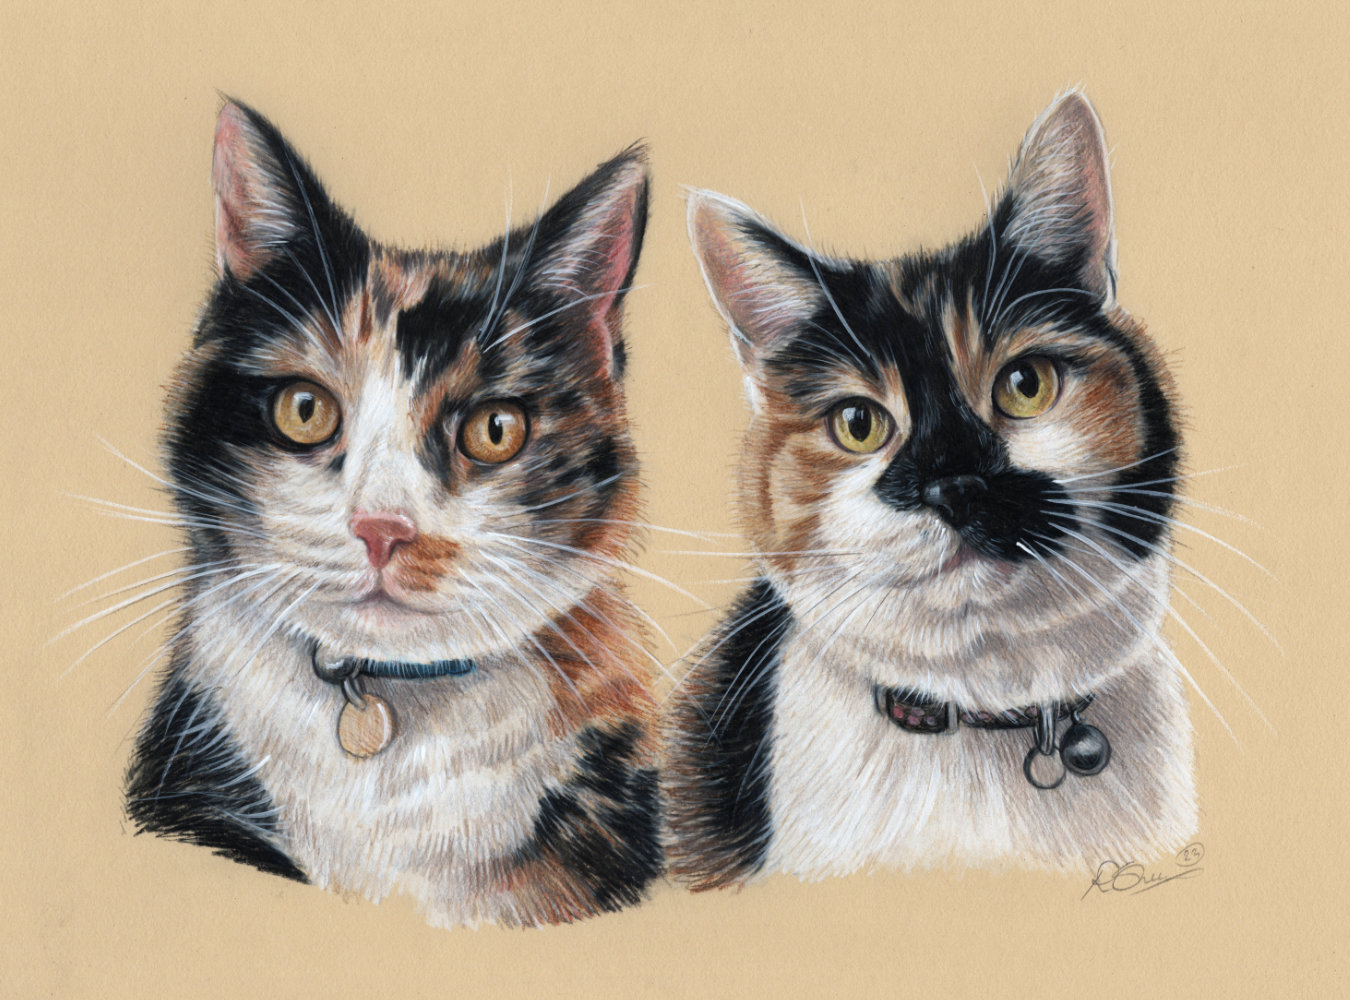 Featured image for “A Portrait of Two Tabby Cats”